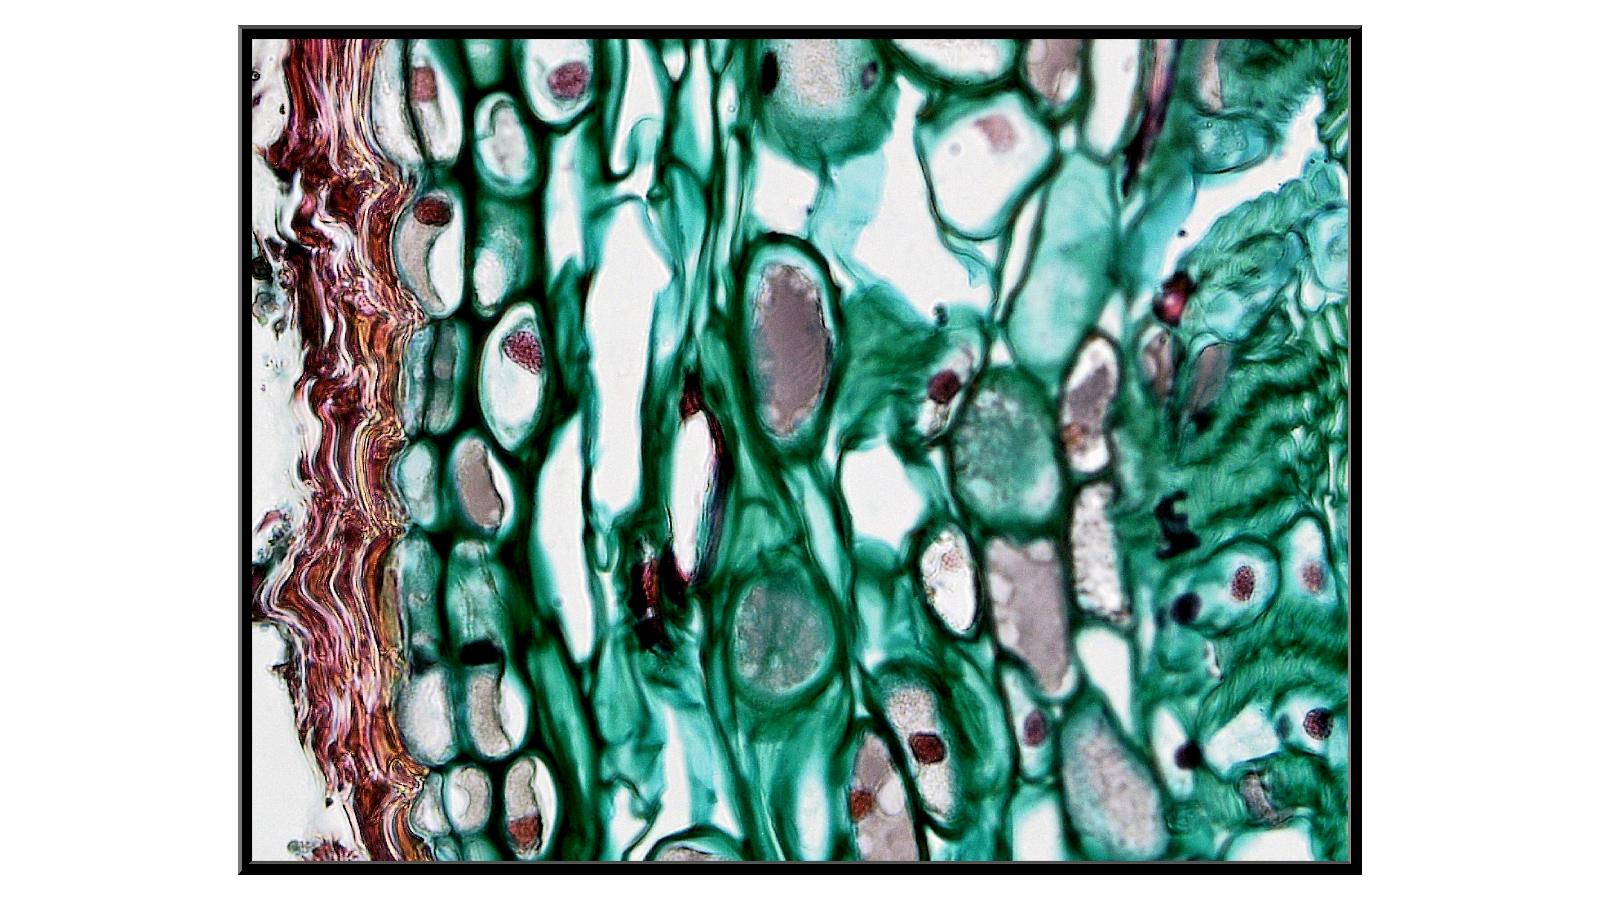 Cross-section of a 2-year-old pine stem - bark x400